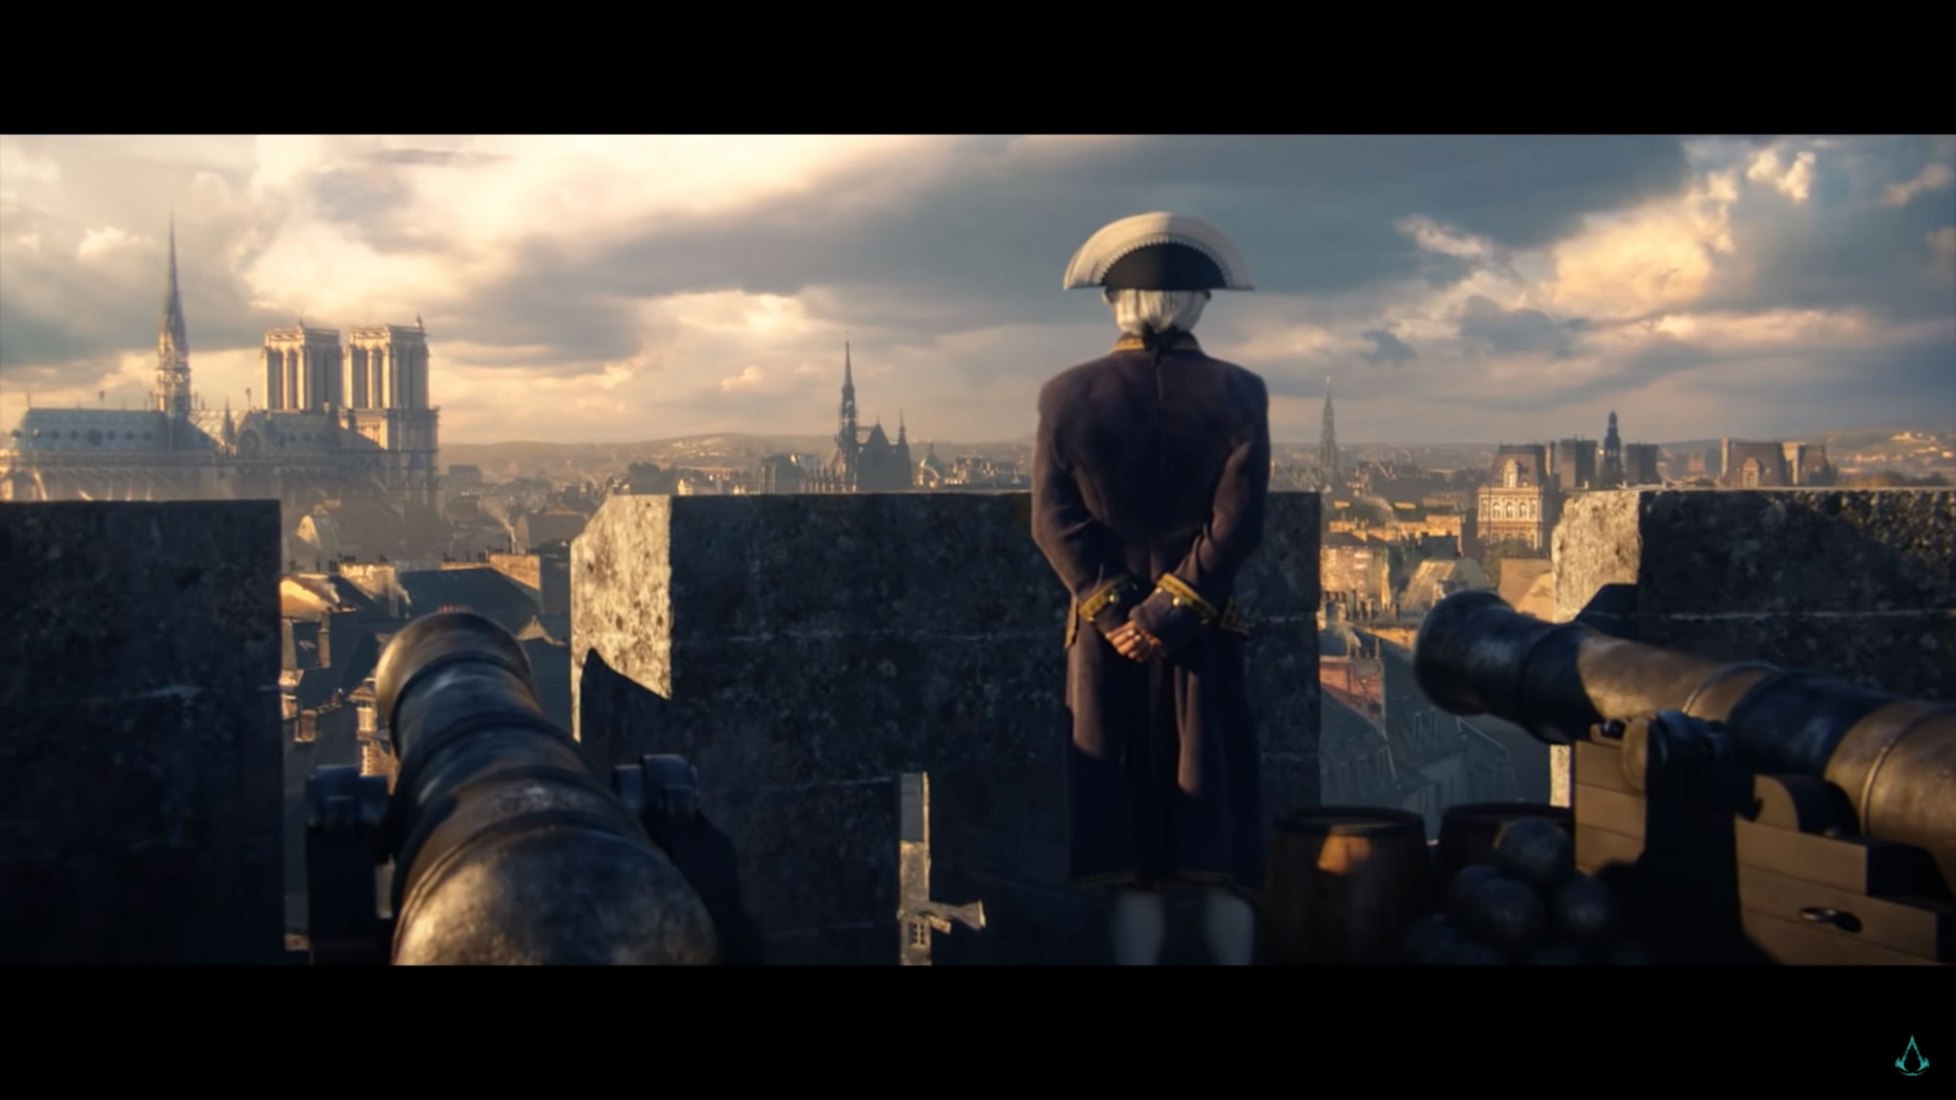 Assassin's Creed Unity trailer by Ubisoft.